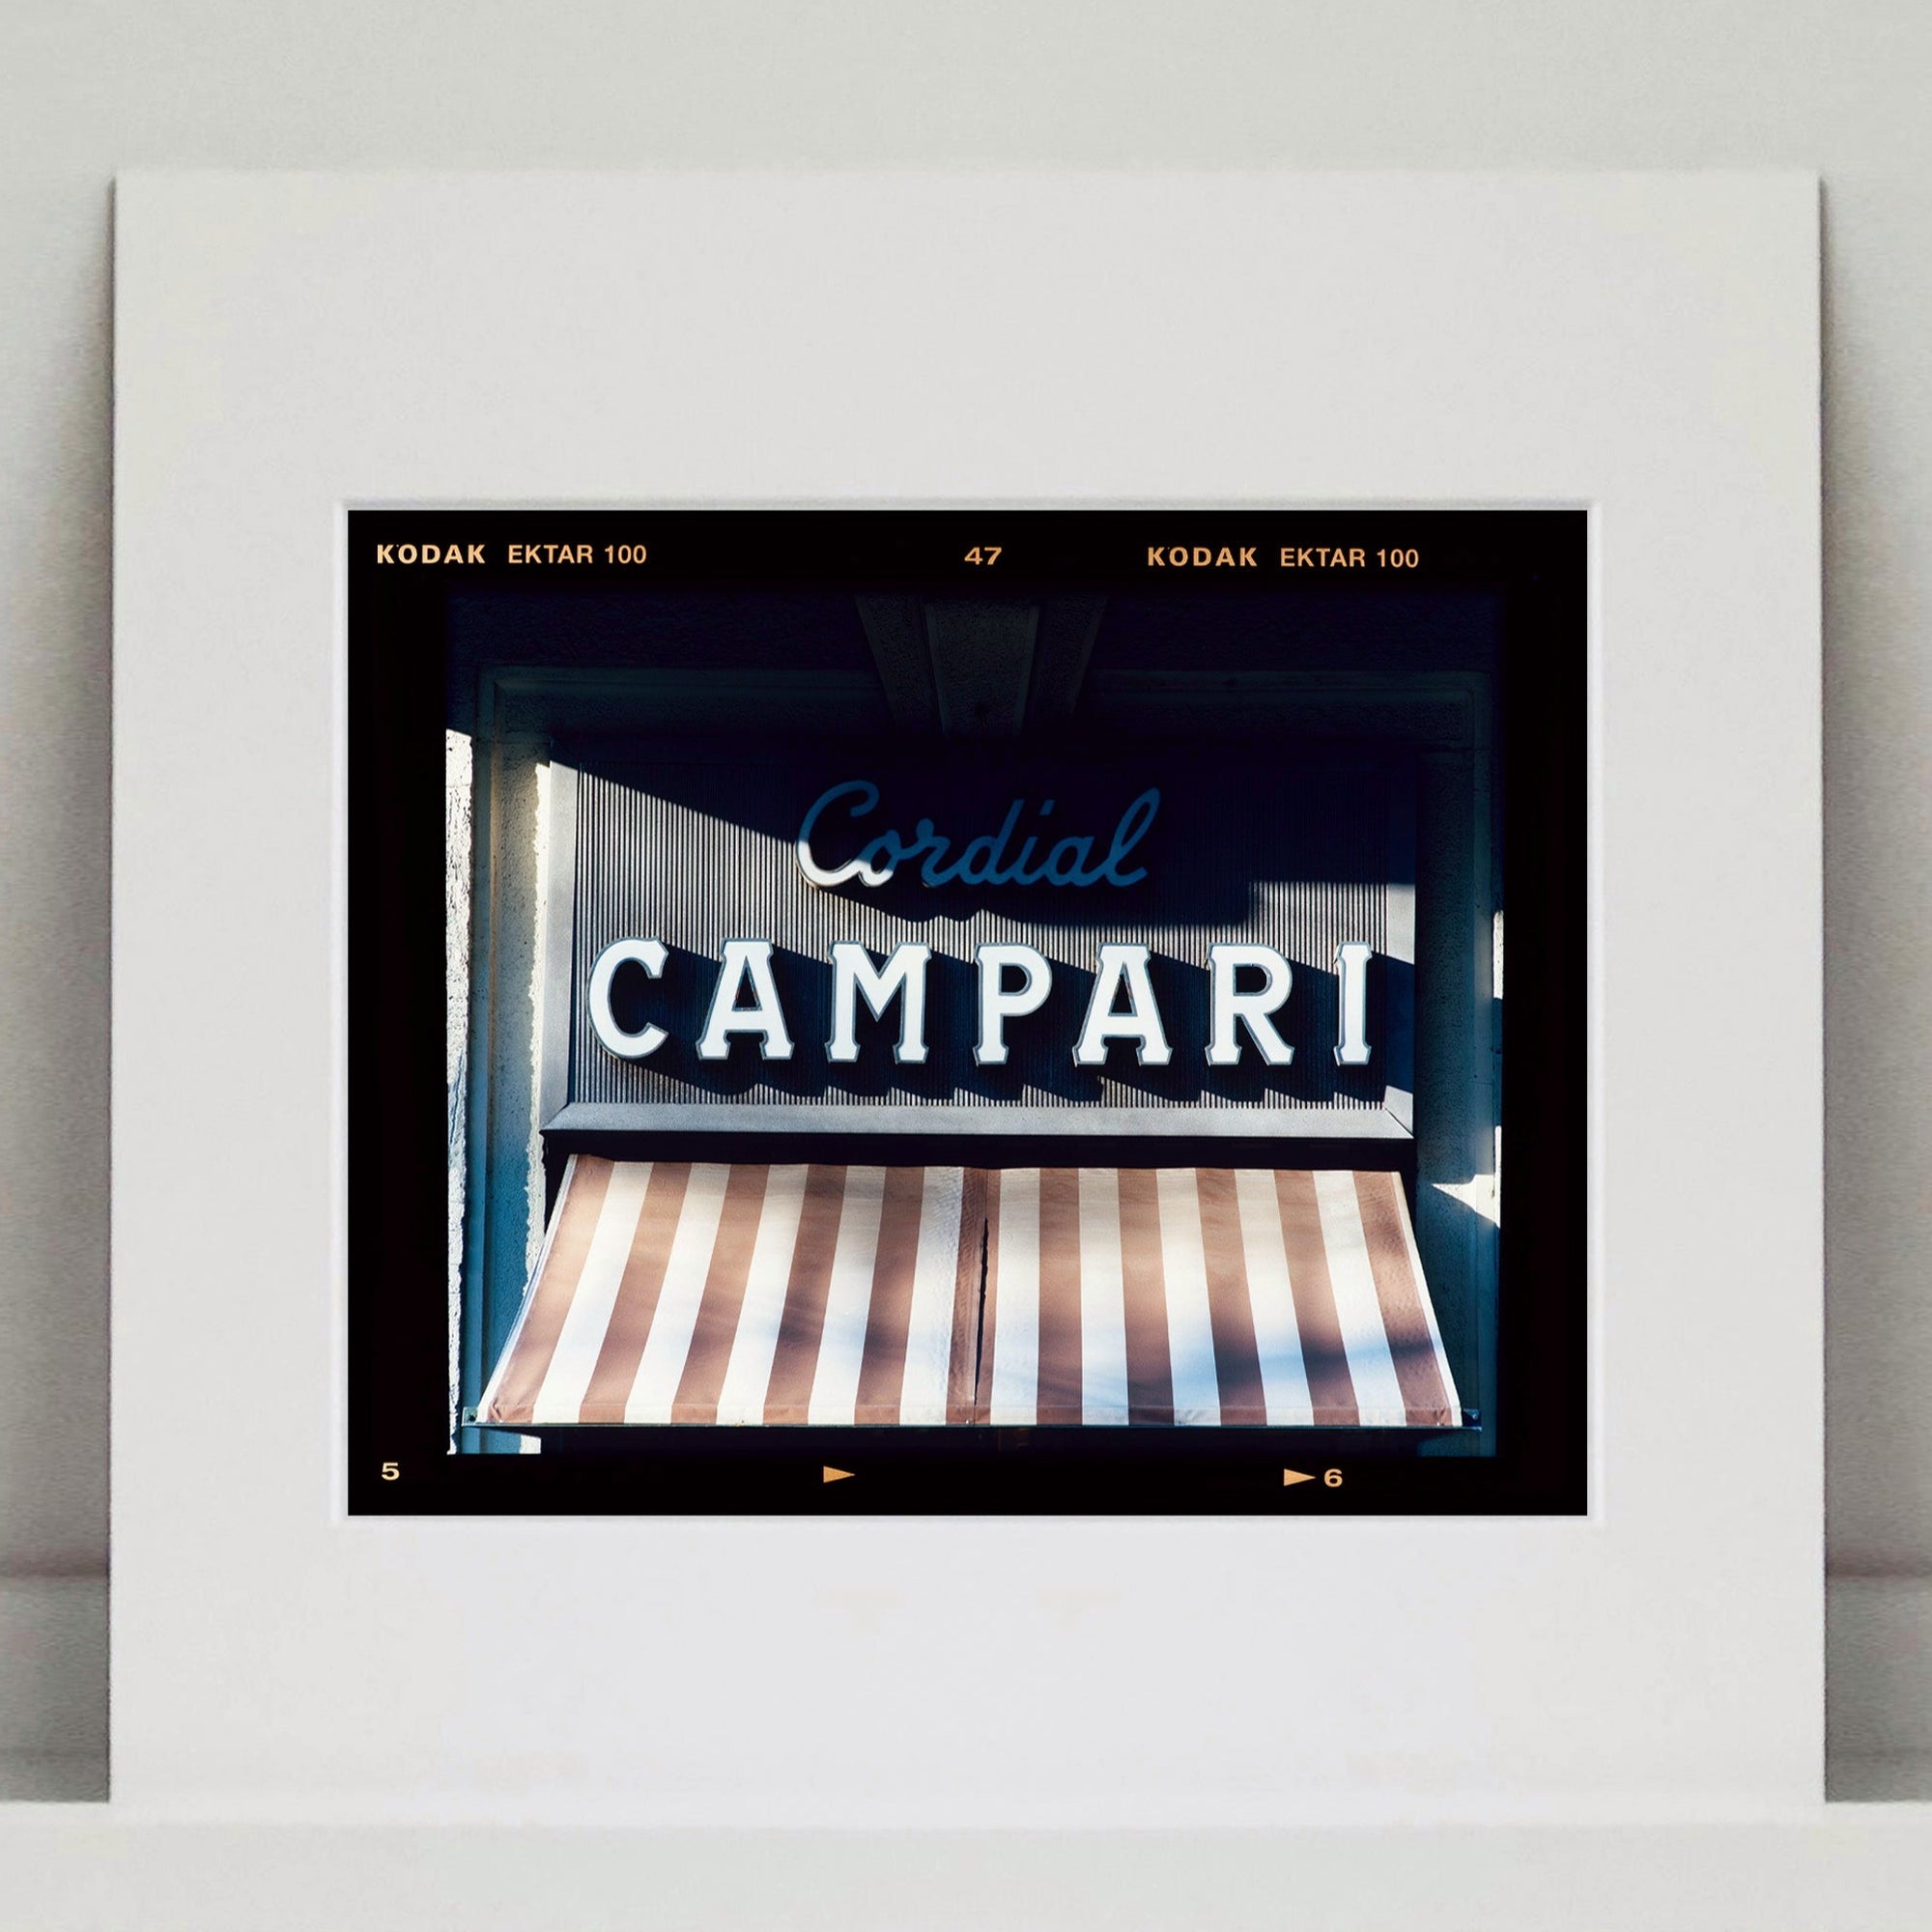 Cordial Campari, photographed as part of Richard Heeps’ series 'A Short History of Milan’ features typography above the striped awning of a fascist building. 